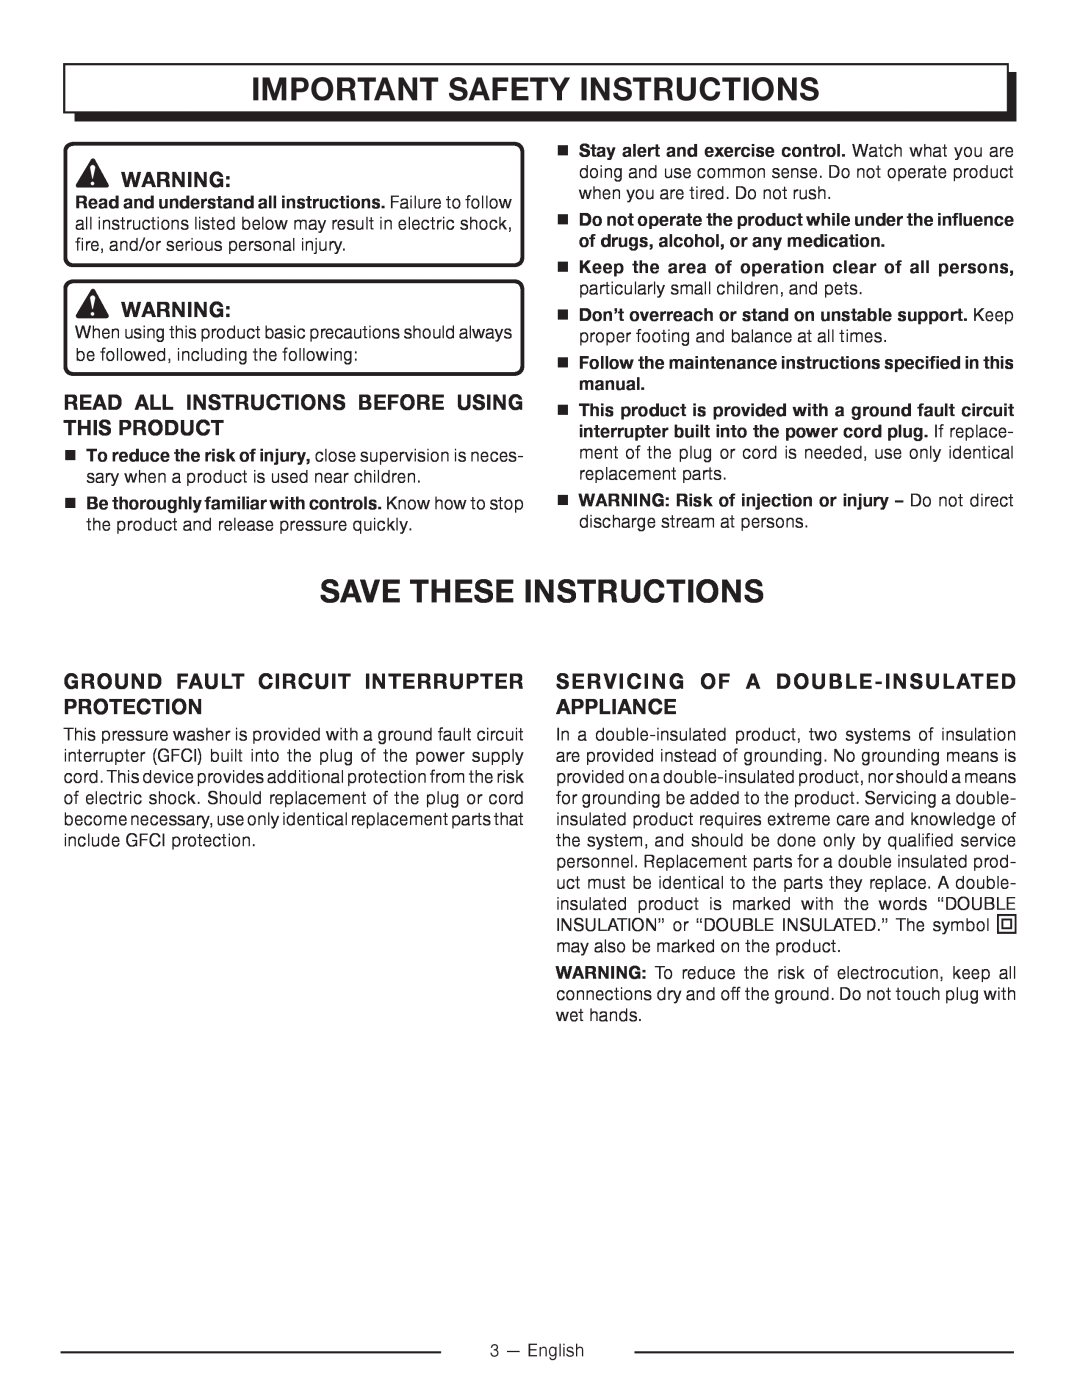 Homelite UT80715 Important Safety Instructions, Save These Instructions, Read All Instructions Before Using This Product 